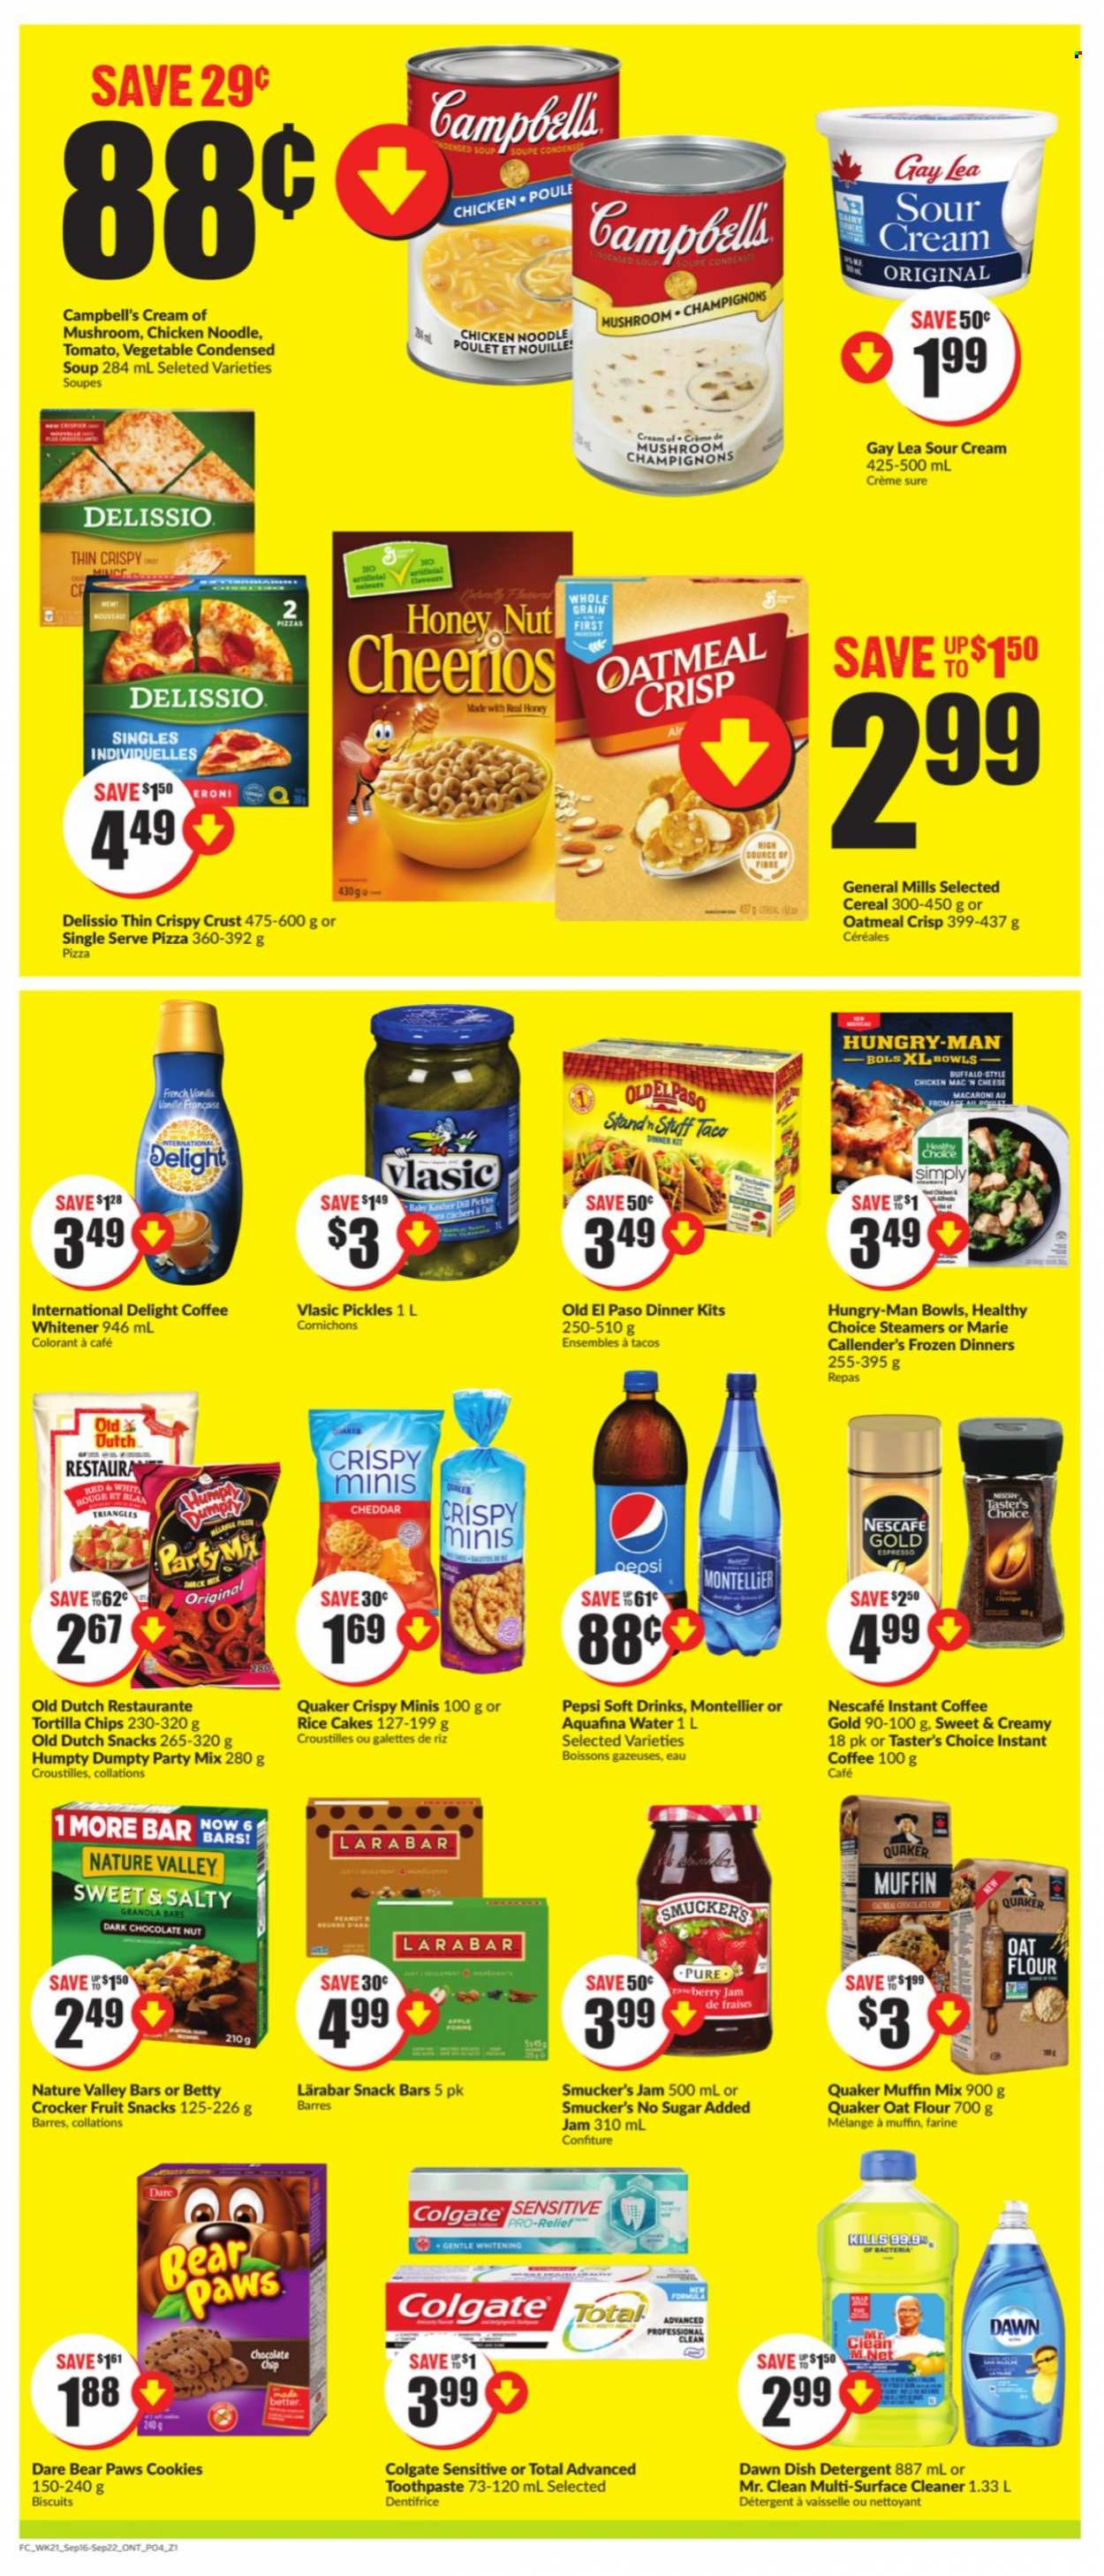 thumbnail - FreshCo. Flyer - September 16, 2021 - September 22, 2021 - Sales products - Old El Paso, tacos, muffin mix, Campbell's, pizza, macaroni, condensed soup, soup, dinner kit, Quaker, noodles, instant soup, Healthy Choice, Marie Callender's, sour cream, cookies, biscuit, dark chocolate, fruit snack, snack bar, tortilla chips, oatmeal, oats, pickles, cereals, Cheerios, granola bar, Nature Valley, fruit jam, Pepsi, soft drink, Aquafina, instant coffee, detergent, Colgate, Nescafé. Page 4.